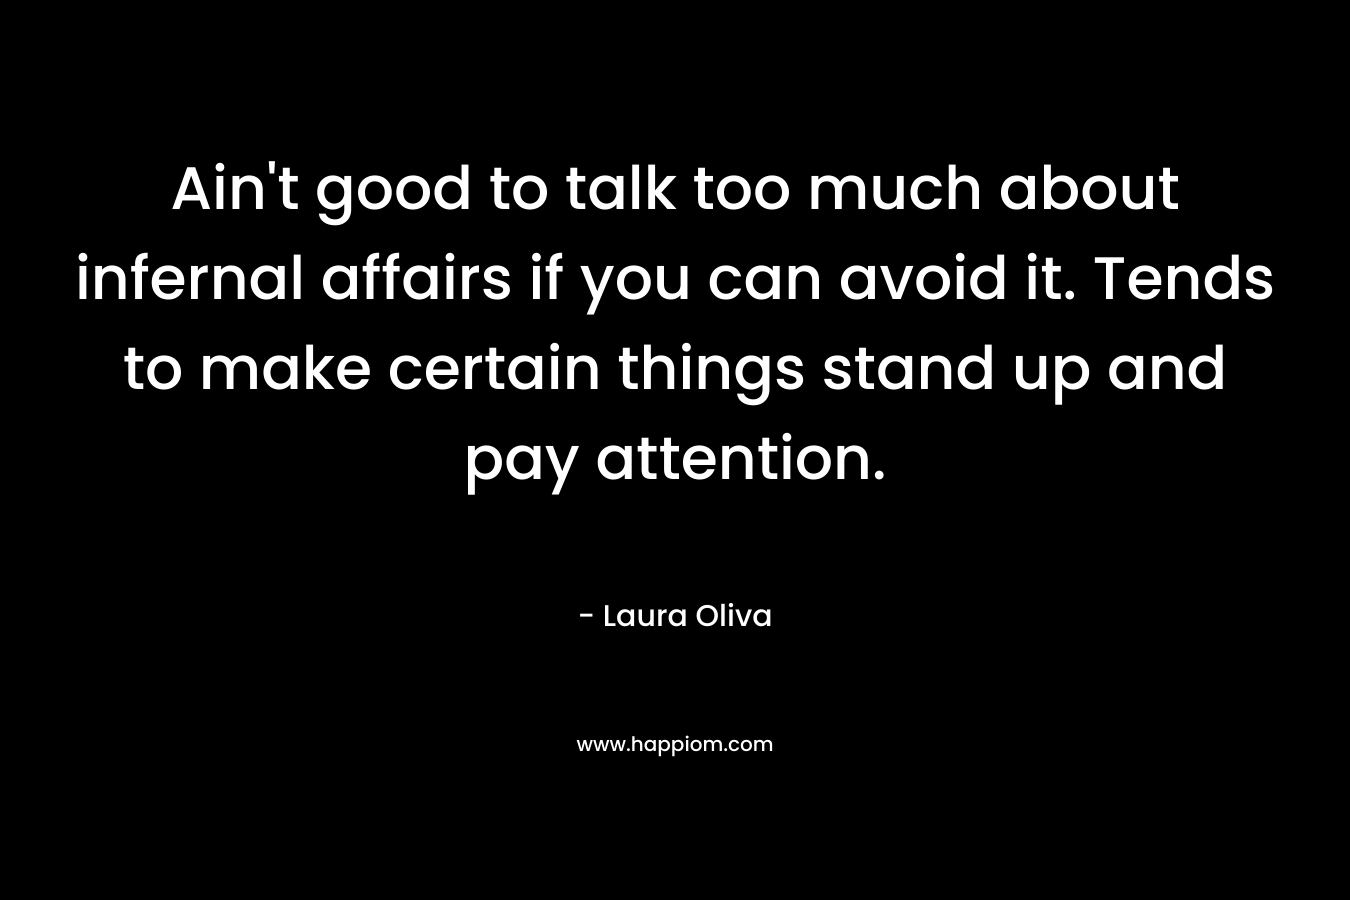 Ain't good to talk too much about infernal affairs if you can avoid it. Tends to make certain things stand up and pay attention.